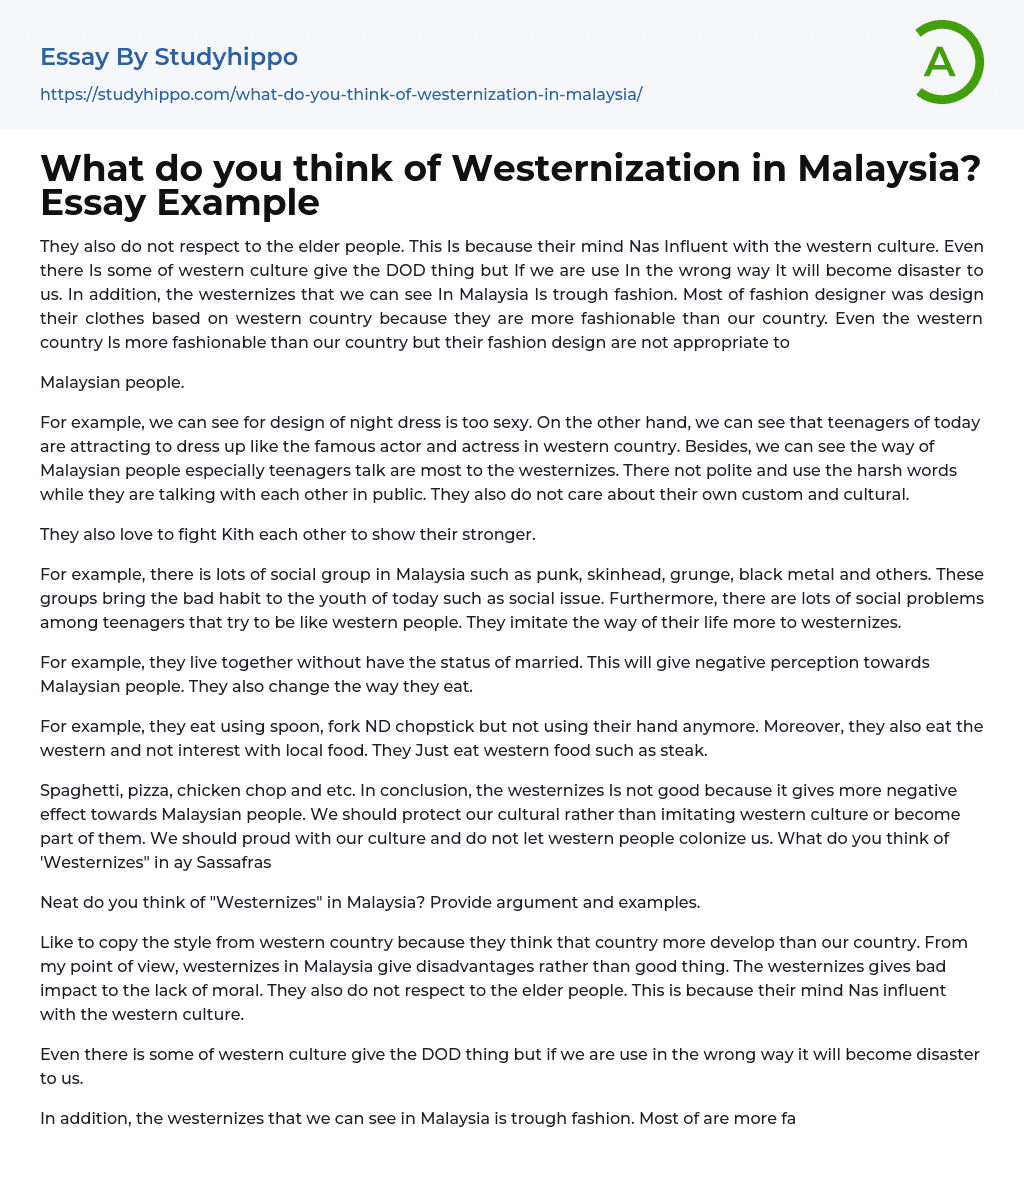 What do you think of Westernization in Malaysia? Essay Example